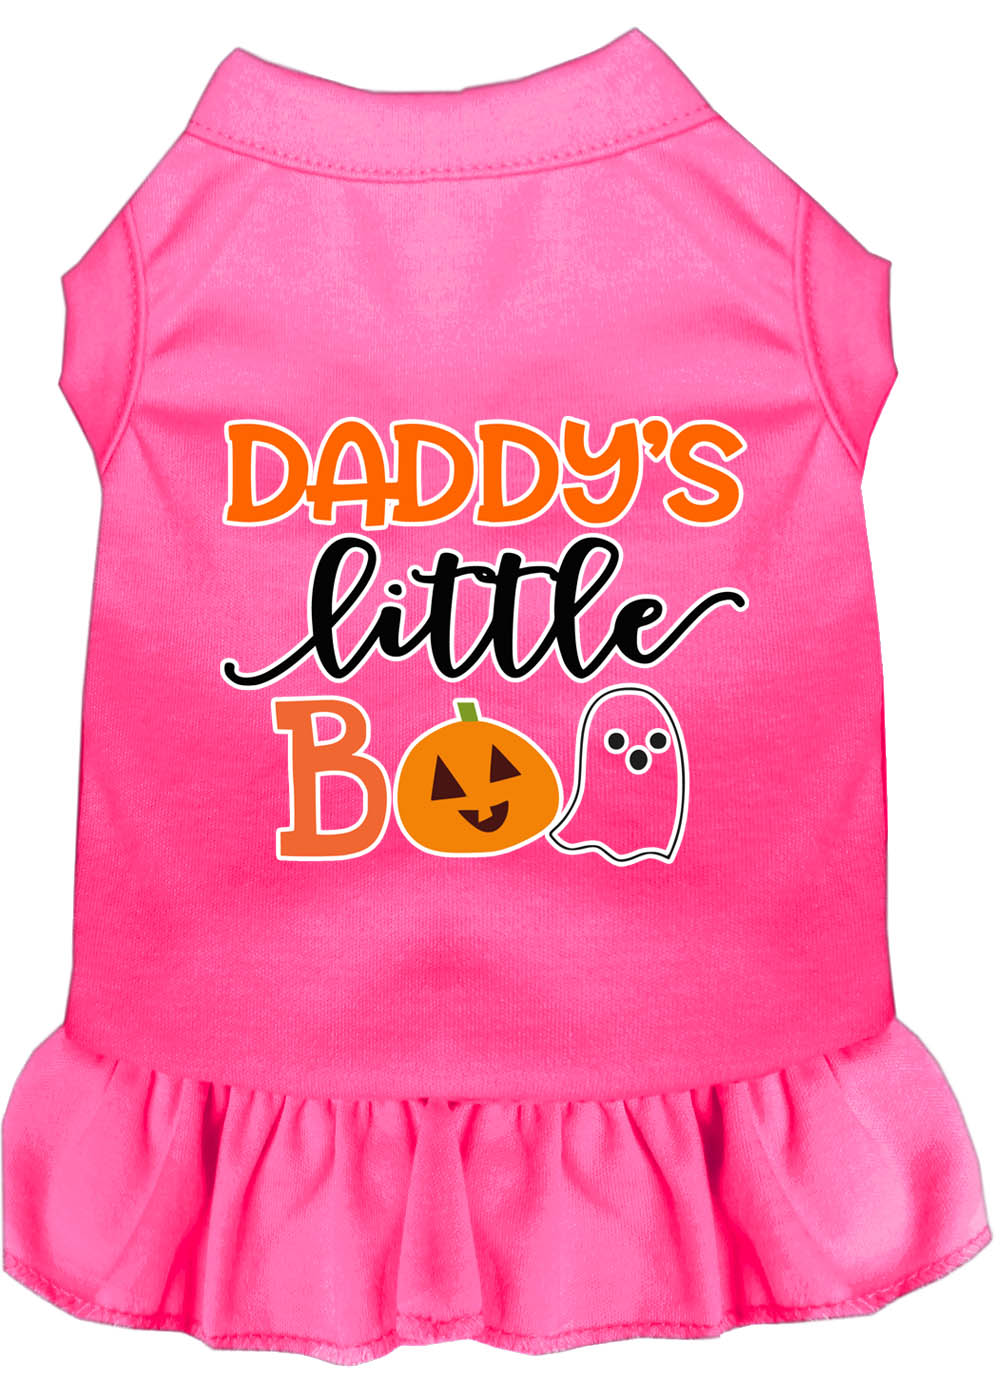 Daddy's Little Boo Screen Print Dog Dress Bright Pink Med